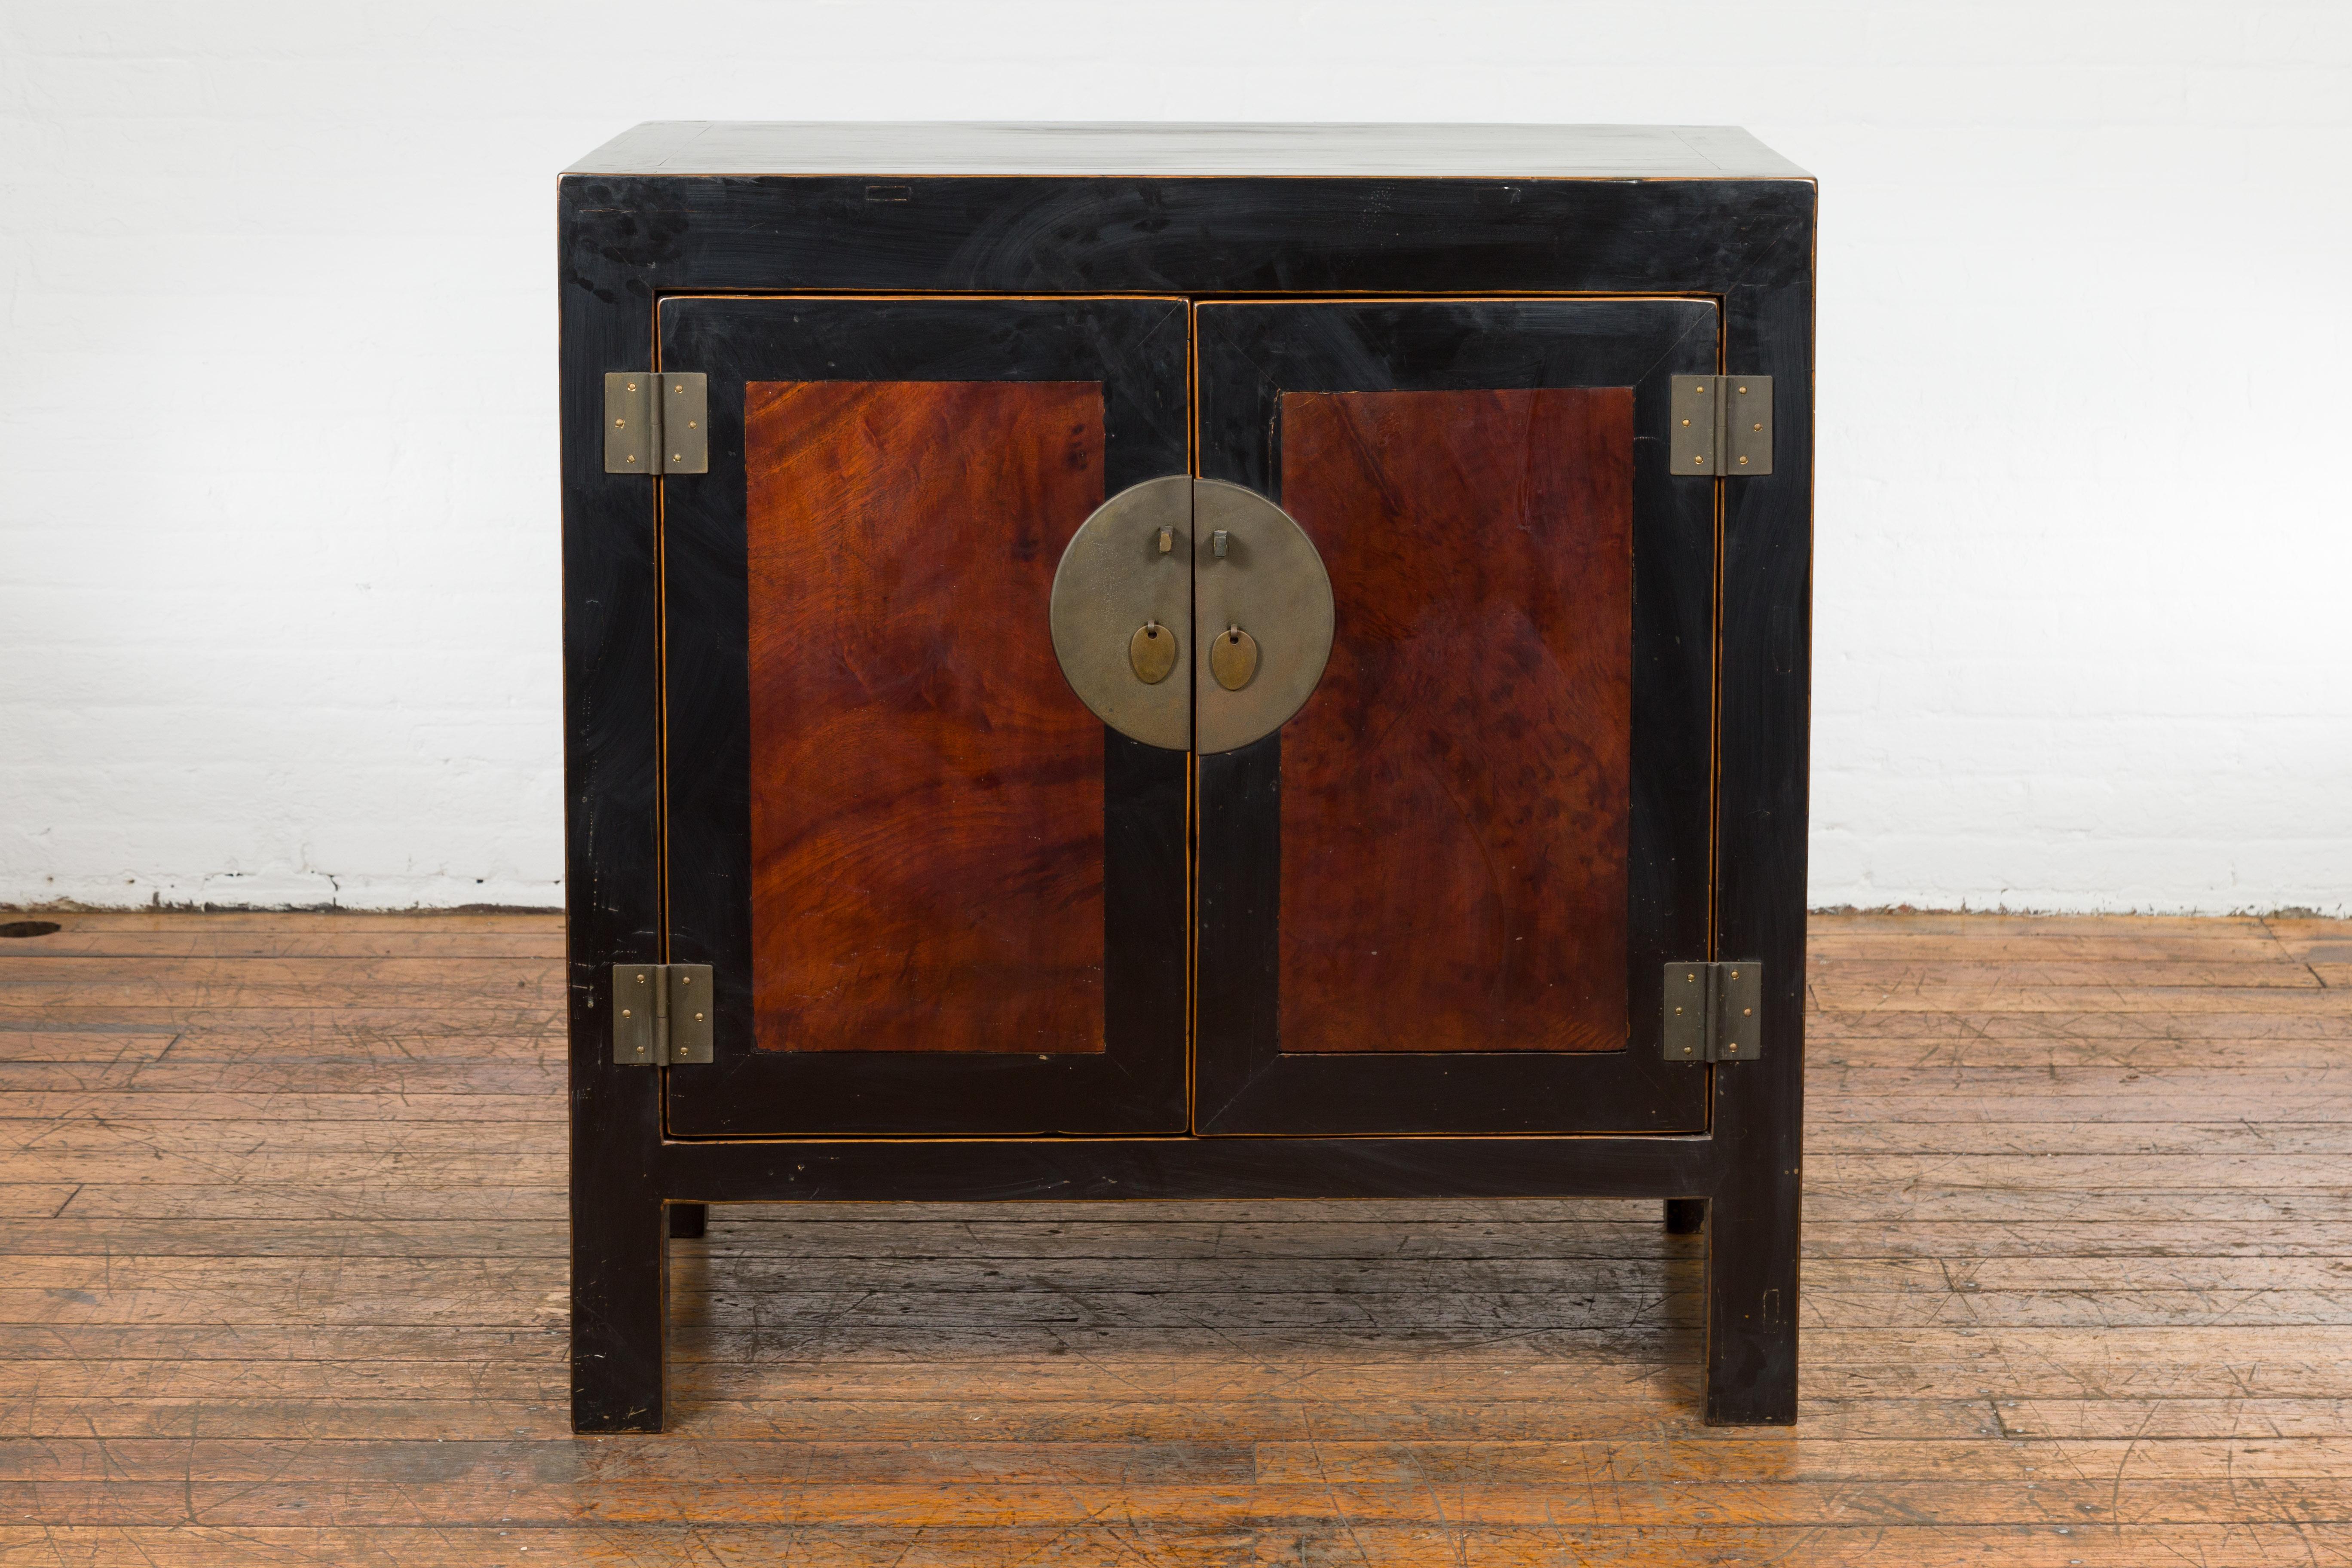 A Chinese Qing Dynasty period Hebei black lacquered two door low cabinet from the 19th century, with inset burl panels, golden trim and brass hardware. Created in Hebei, China during the Qing Dynasty period in the 19th century, this two-toned low